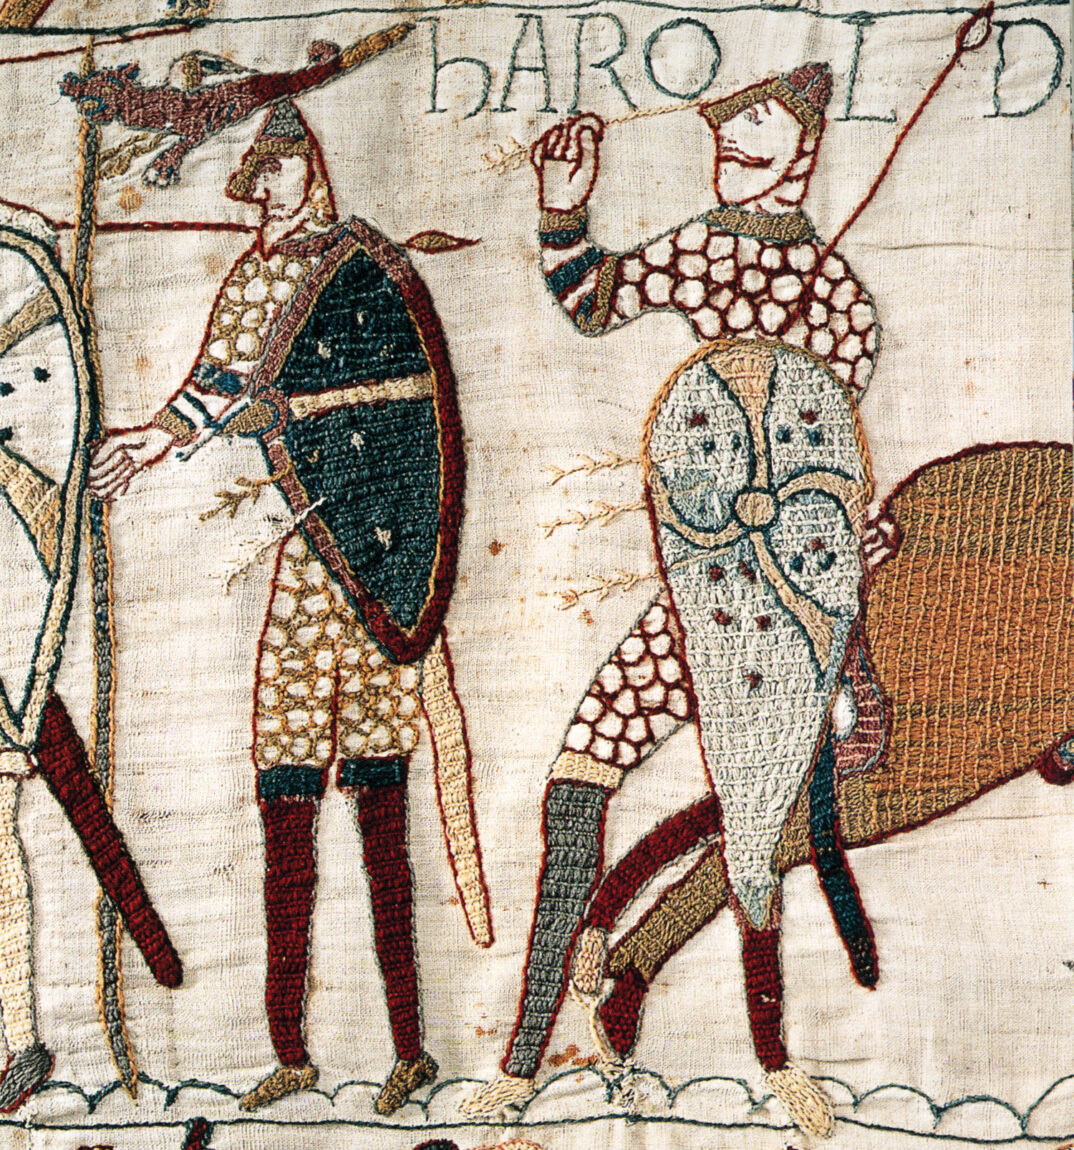 Anglo-Saxon King Harold, right, was struck in the eye by an arrow during the Battle of Hastings. More arrows pierce his shield and the shield of the knight to the left.